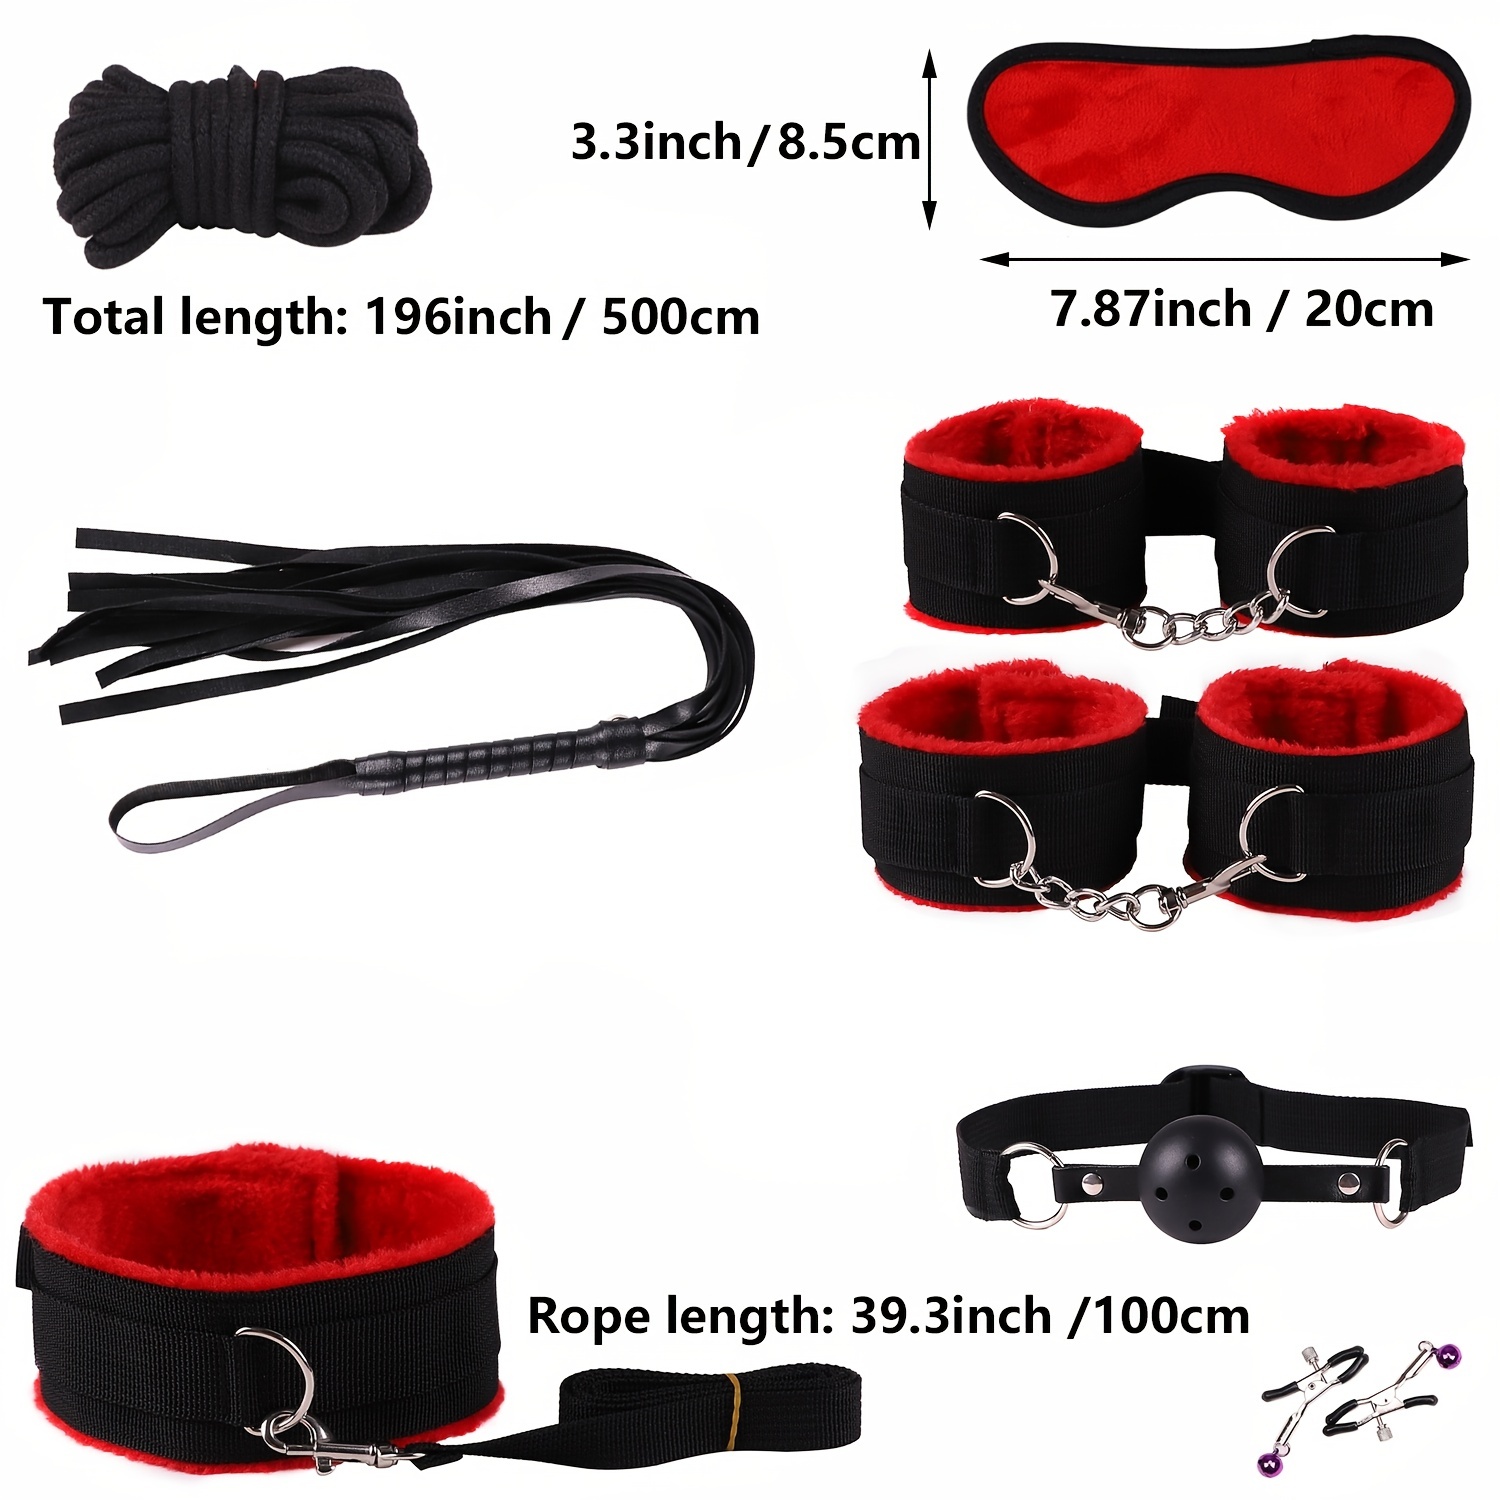 Nxy Sm Bondage Sex Games Bdsm Set Whip Gag Nipple Clamps Rope Handcuffs Toys  For Couples Exotic Y Lingerie Nurse Costume Cosplay 1223 From Sexuality,  $21.03